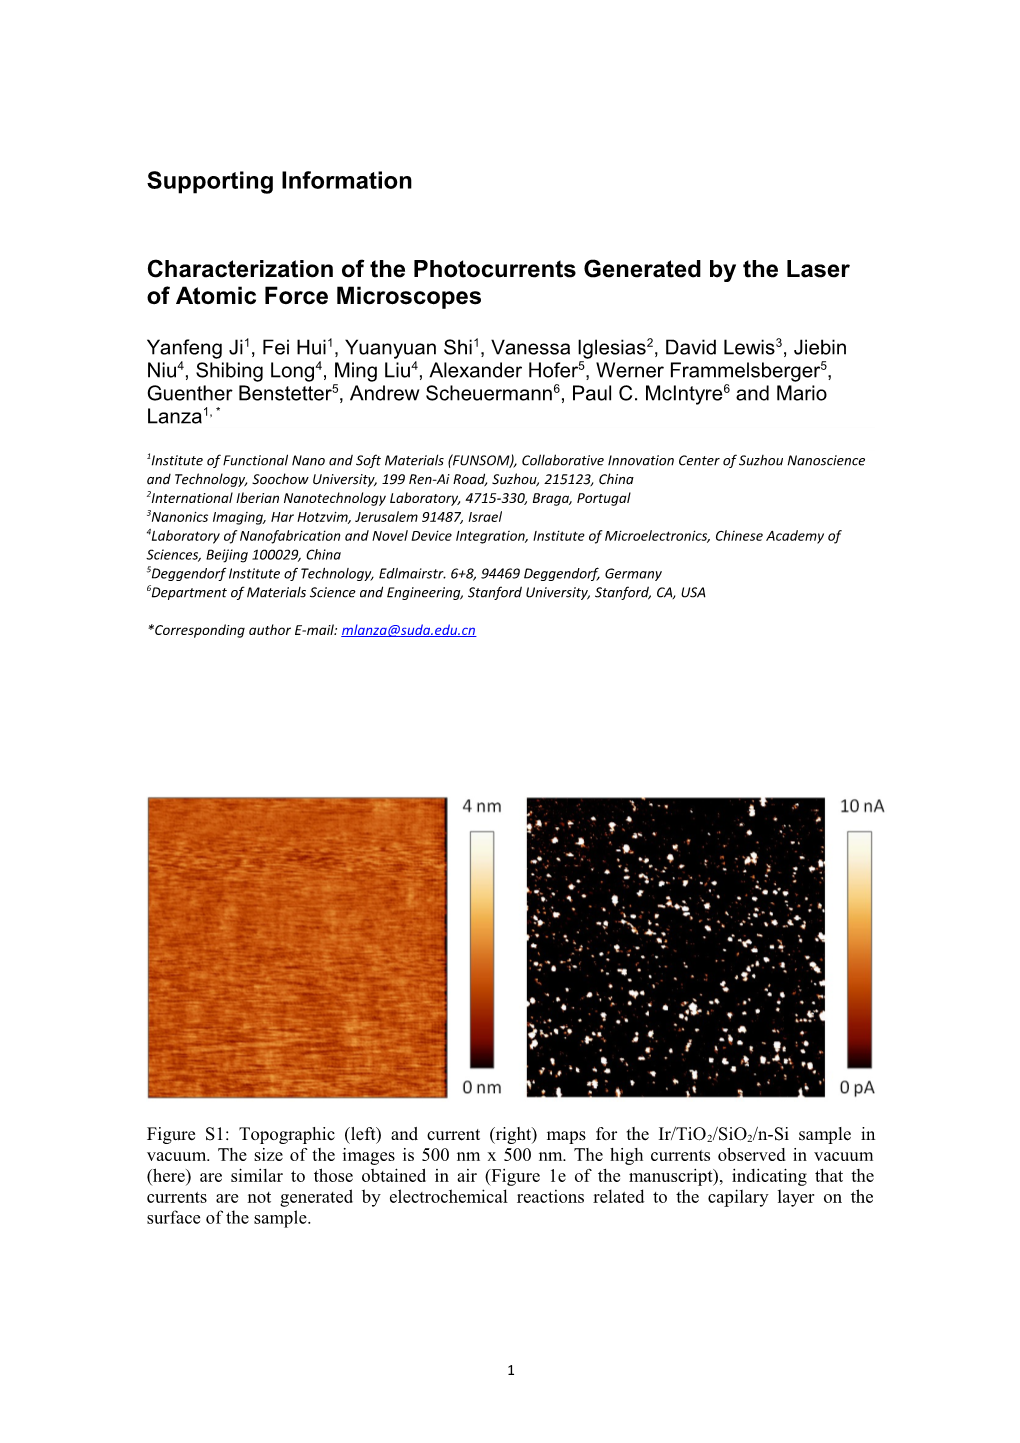 Characterization of the Photocurrents Generated by the Laser of Atomic Force Microscopes